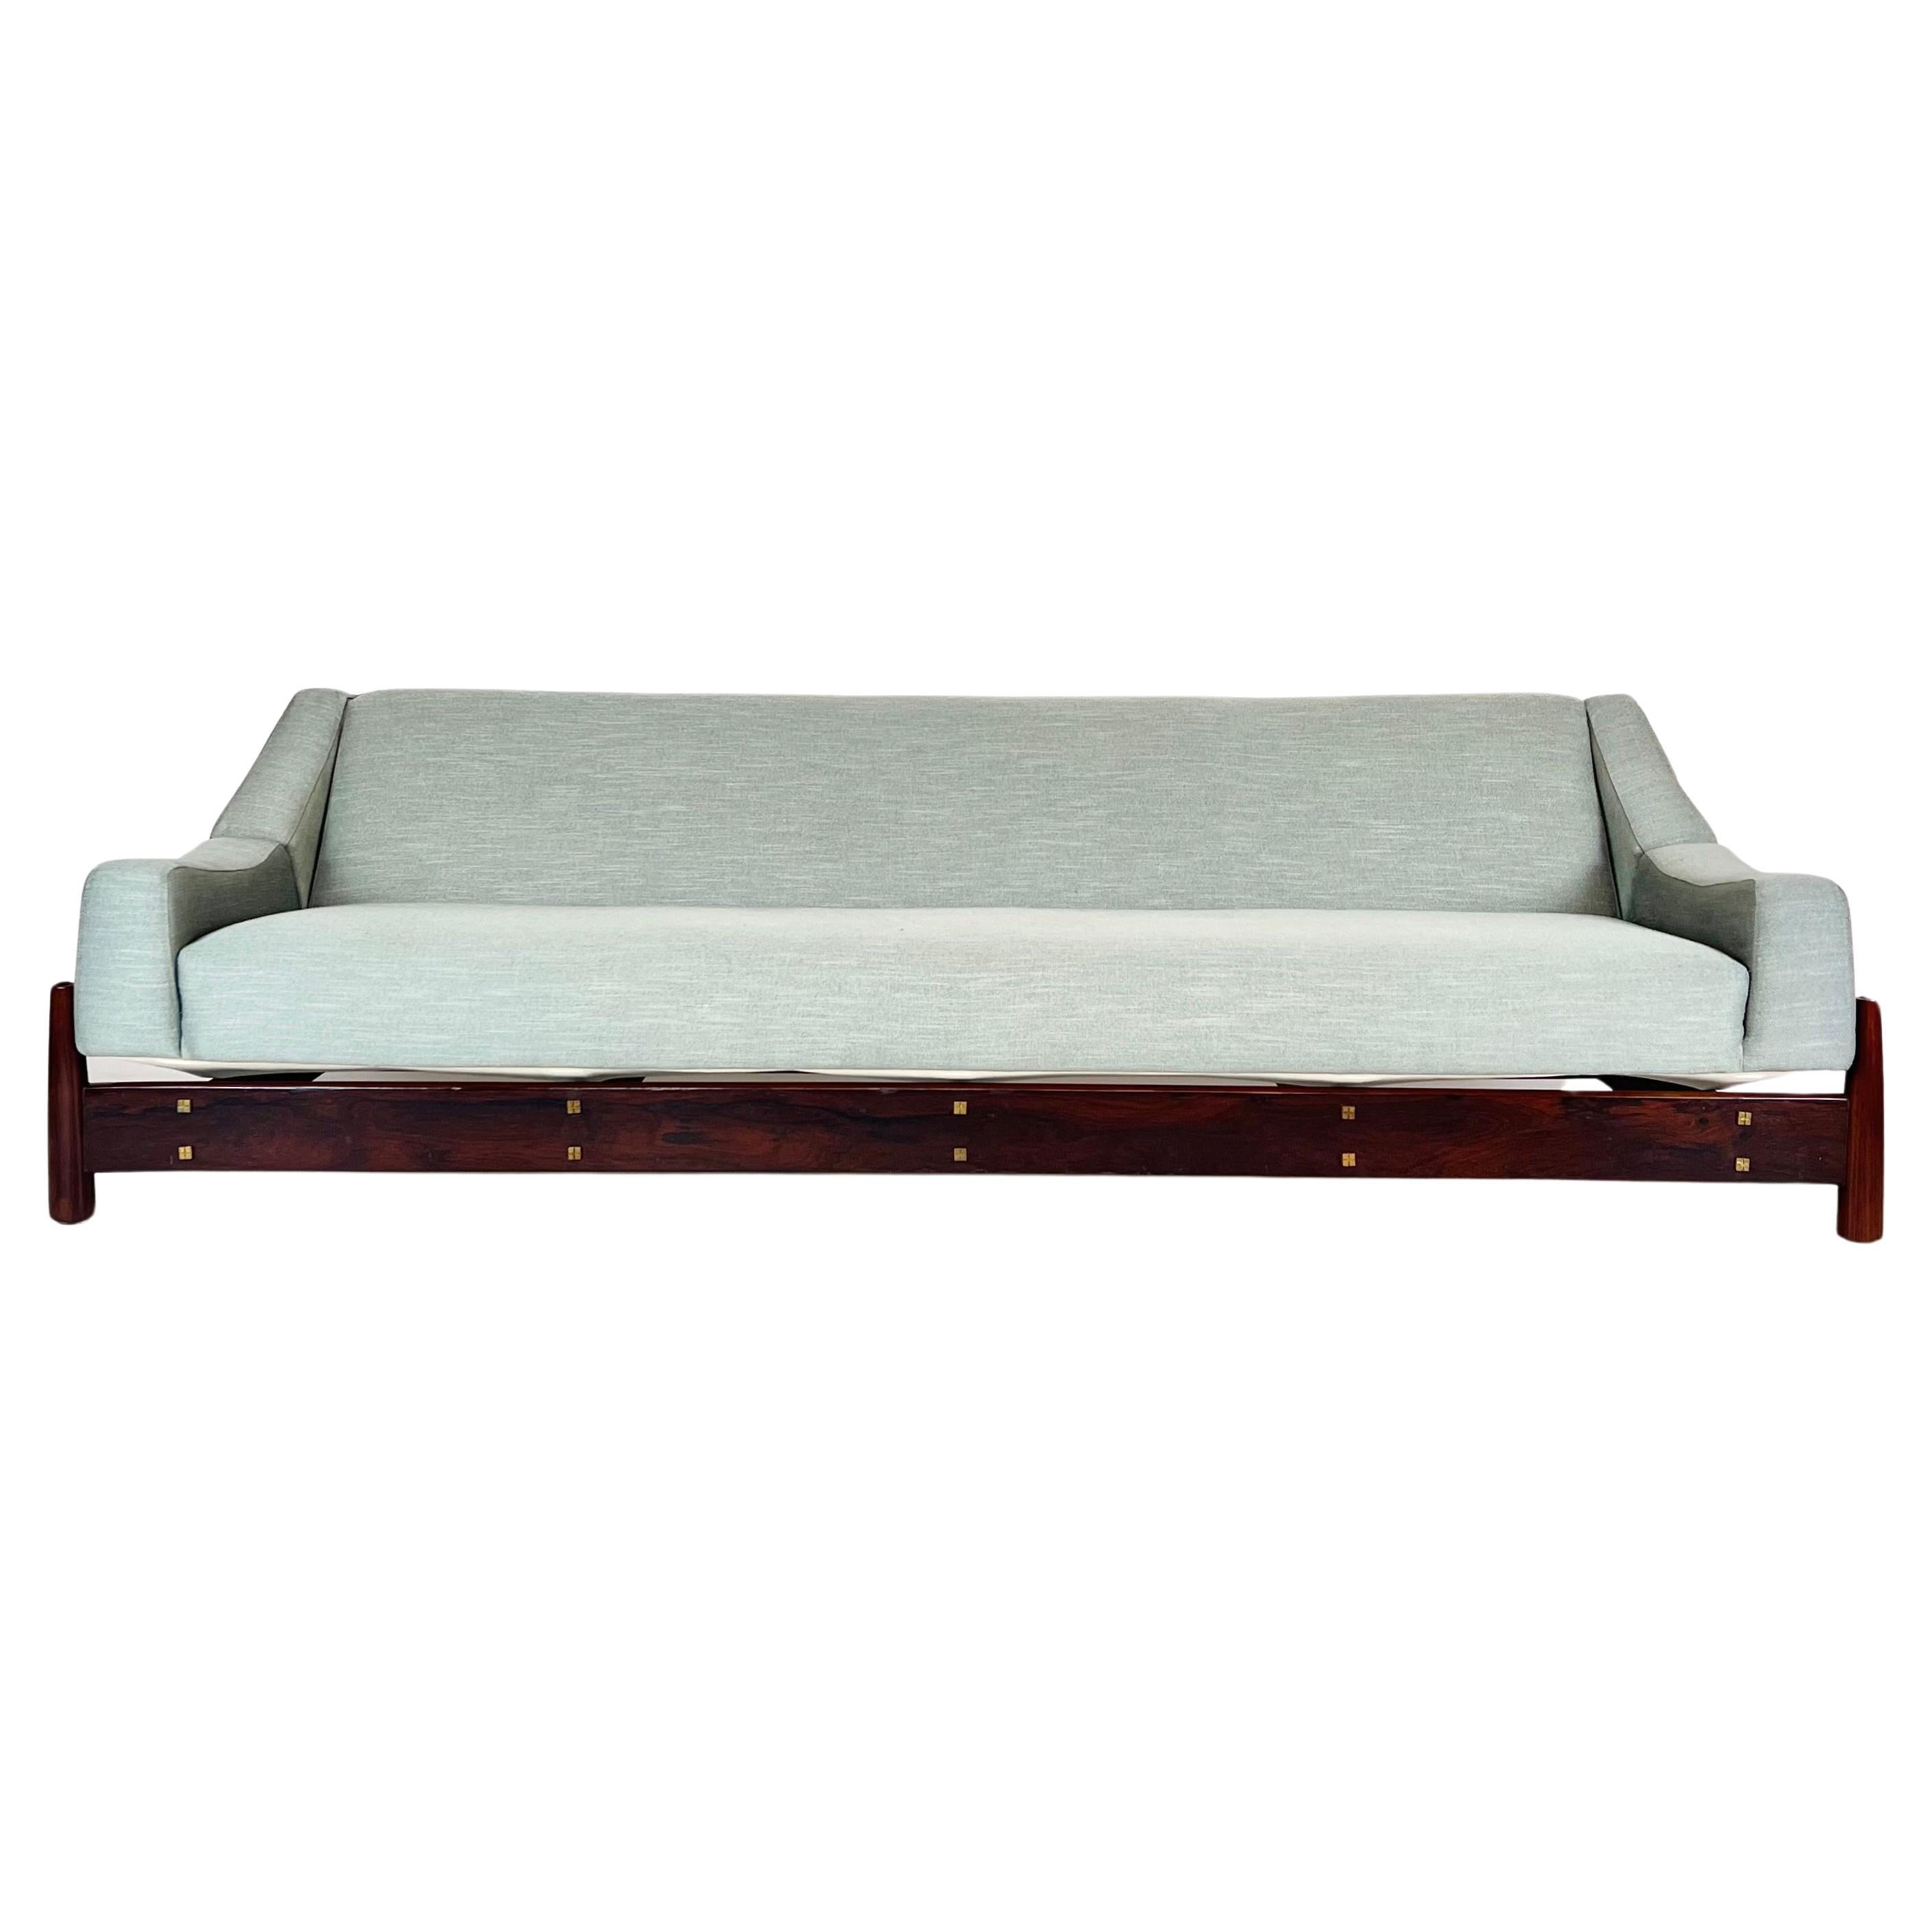 Cimo S/A Sofa from the 60s, Brazil, structure in Jacaranda